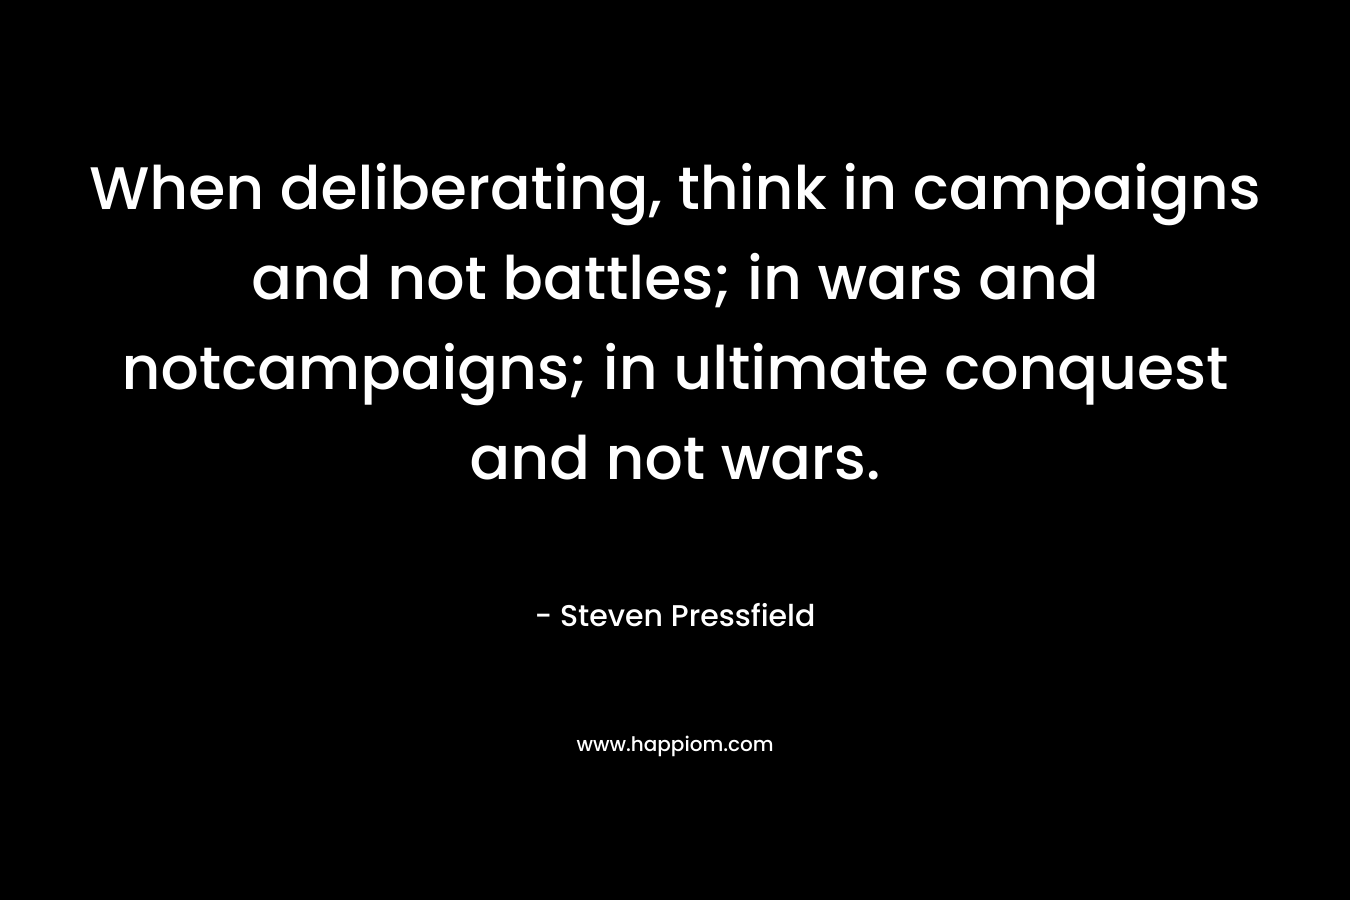 When deliberating, think in campaigns and not battles; in wars and notcampaigns; in ultimate conquest and not wars. – Steven Pressfield